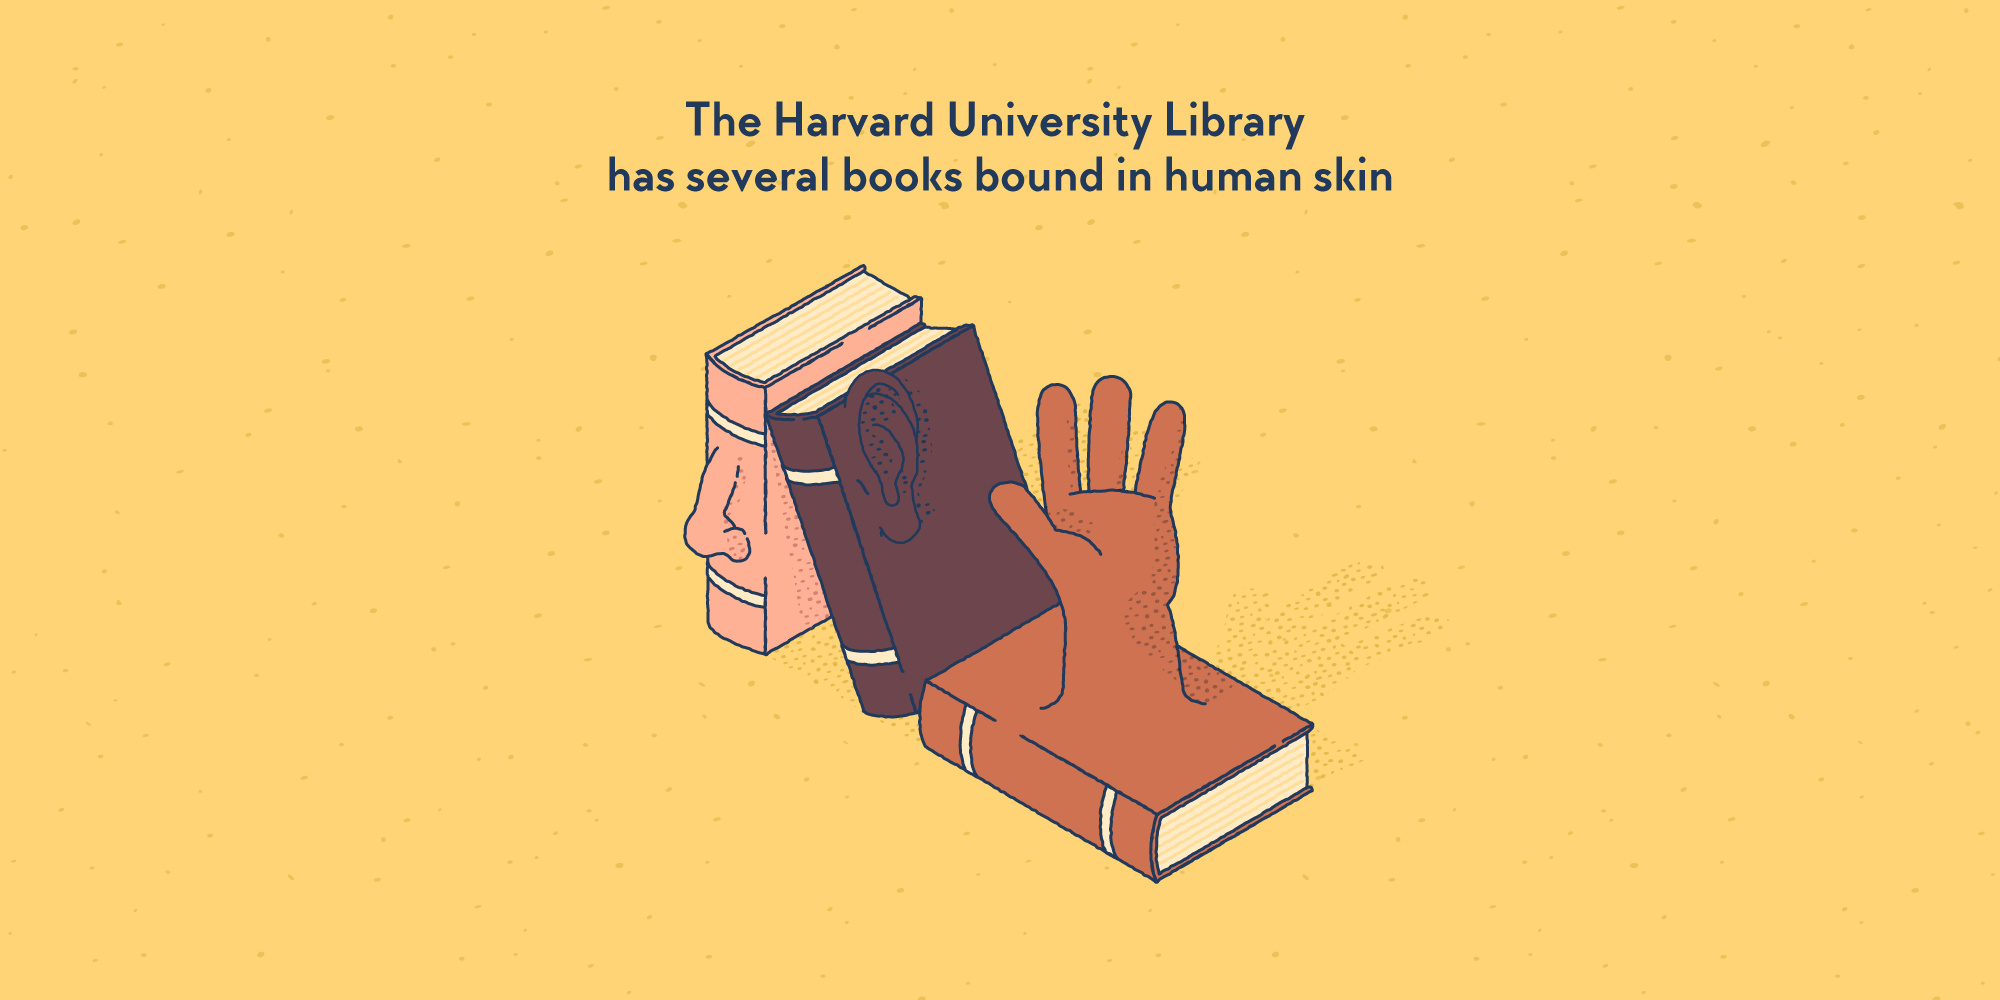 Three old books lined up next to each other reveal human body parts (a noise, an ear, and a hand) as part of their binding.